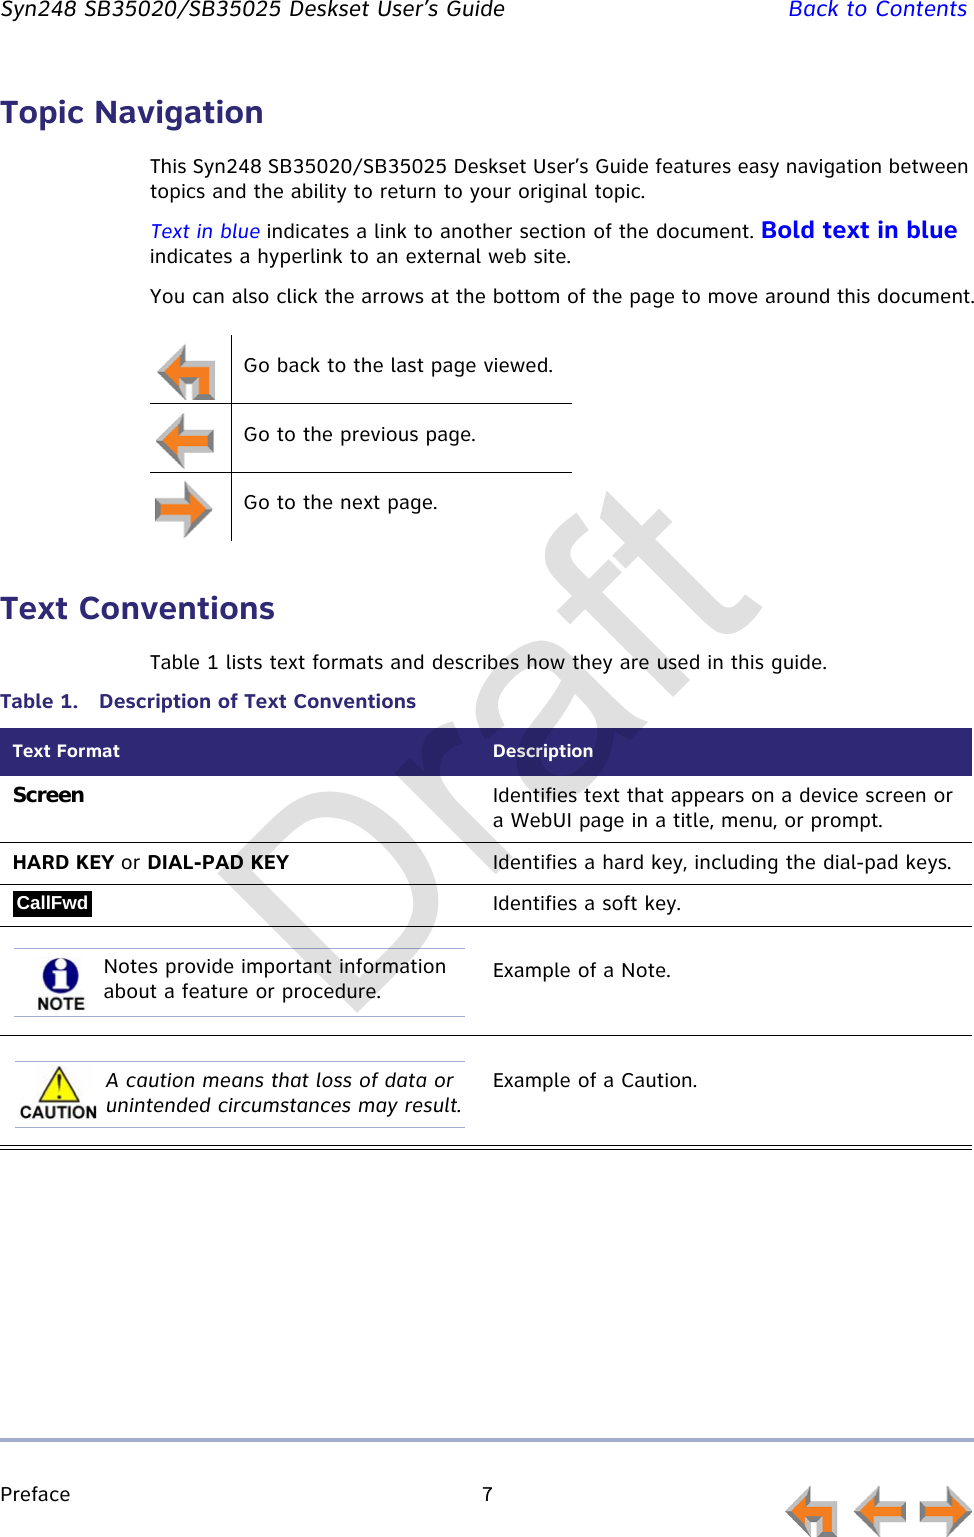 Preface 7         Syn248 SB35020/SB35025 Deskset User’s Guide Back to ContentsTopic NavigationThis Syn248 SB35020/SB35025 Deskset User’s Guide features easy navigation between topics and the ability to return to your original topic.Text in blue indicates a link to another section of the document. Bold text in blue indicates a hyperlink to an external web site.You can also click the arrows at the bottom of the page to move around this document.Text ConventionsTable 1 lists text formats and describes how they are used in this guide.Go back to the last page viewed.Go to the previous page.Go to the next page.Table 1.  Description of Text ConventionsText Format DescriptionScreen Identifies text that appears on a device screen or a WebUI page in a title, menu, or prompt.HARD KEY or DIAL-PAD KEY Identifies a hard key, including the dial-pad keys.Identifies a soft key.Example of a Note.Example of a Caution.CallFwdNotes provide important information about a feature or procedure.A caution means that loss of data or unintended circumstances may result.Draft